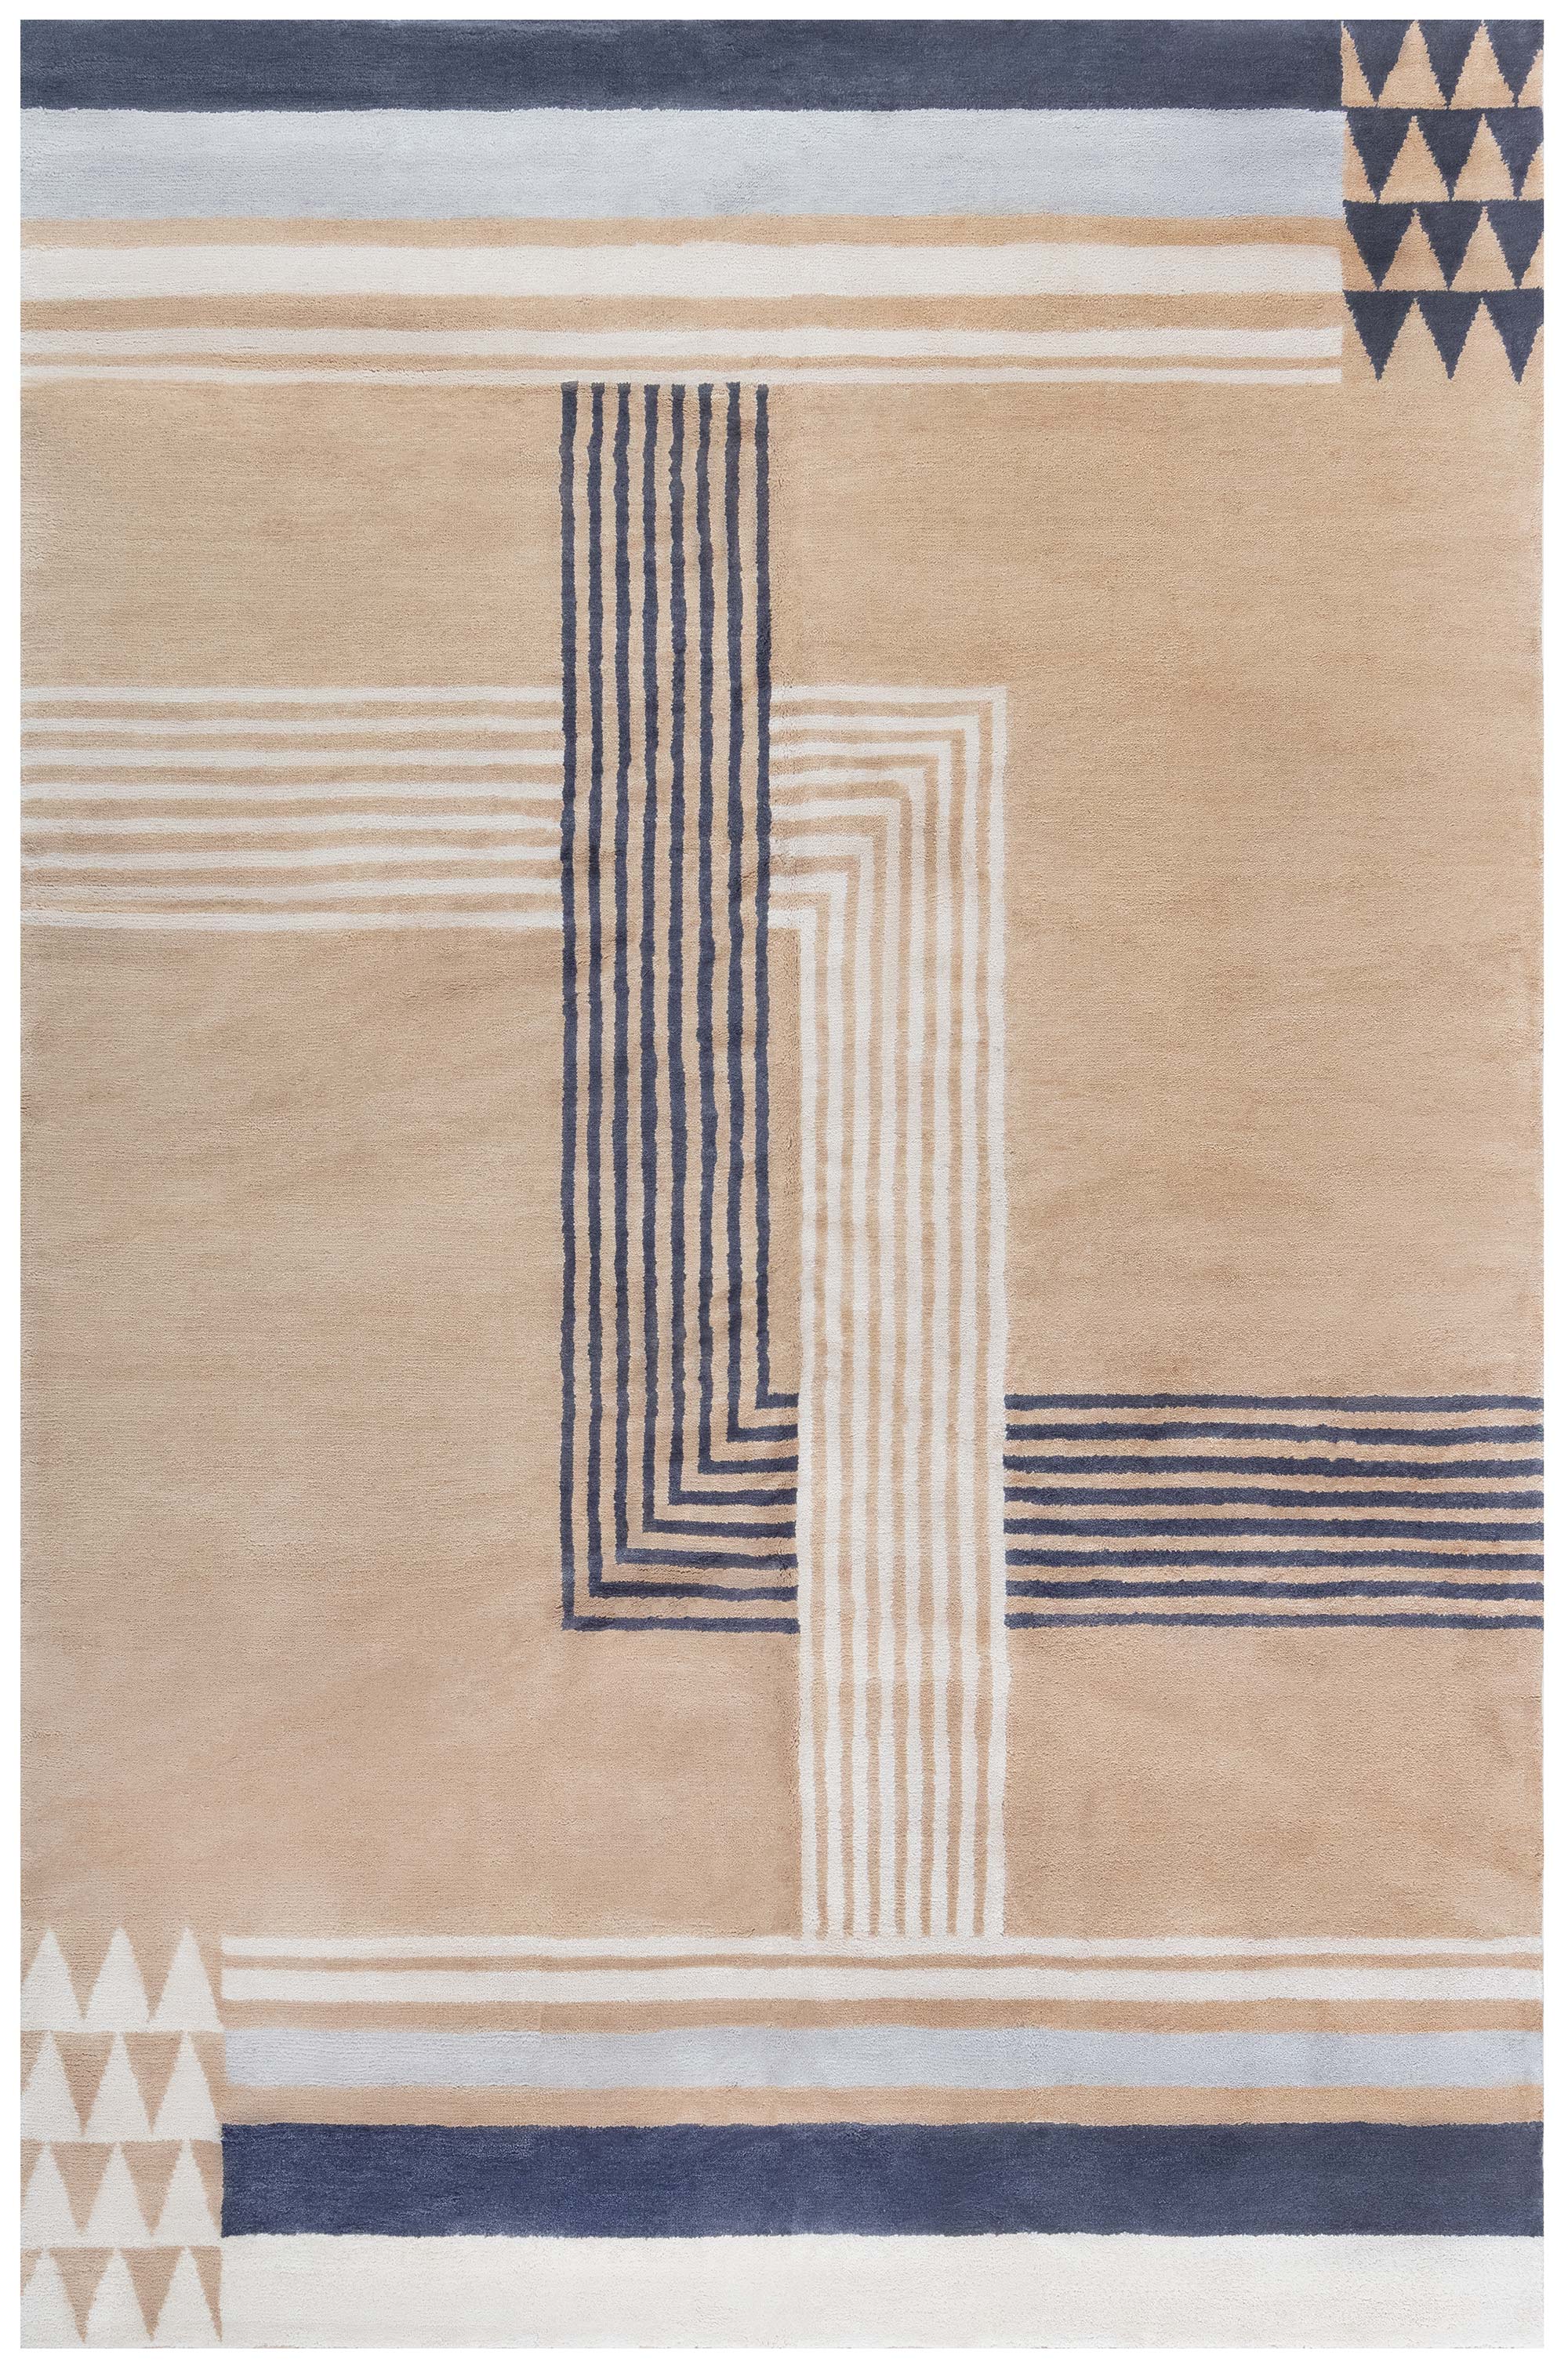 Deco Inspired Rug N12573 by DLB